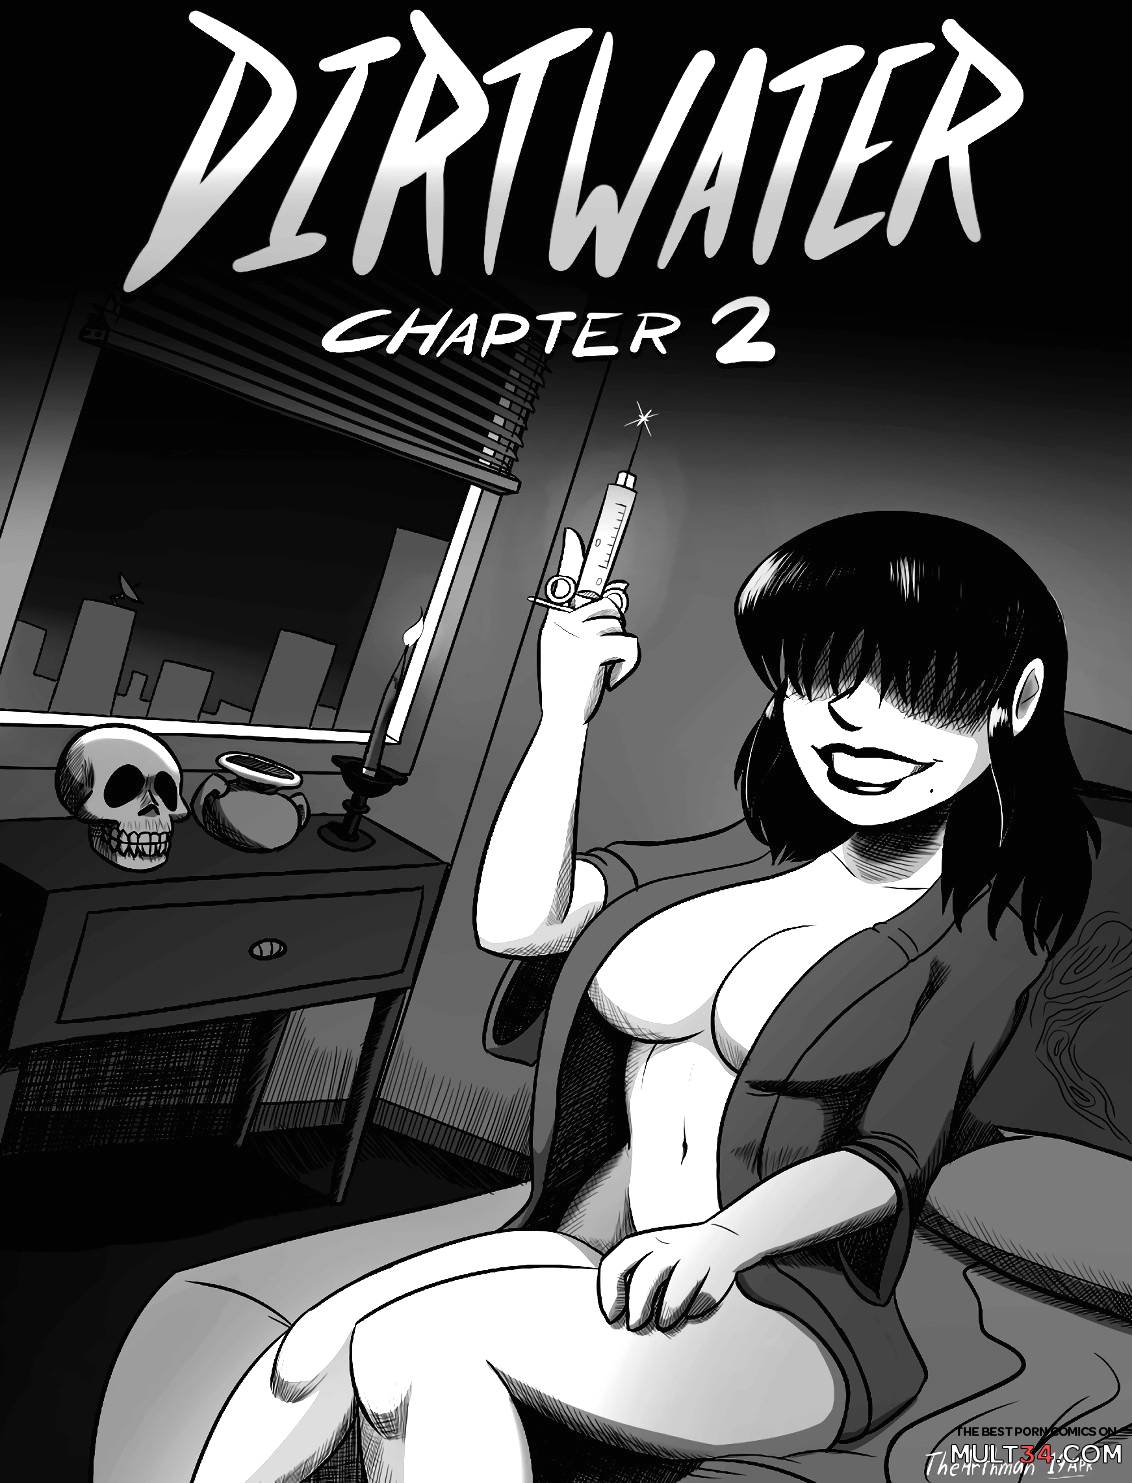 Dirtwater - Chapter 2 (The Big Deposit) page 1